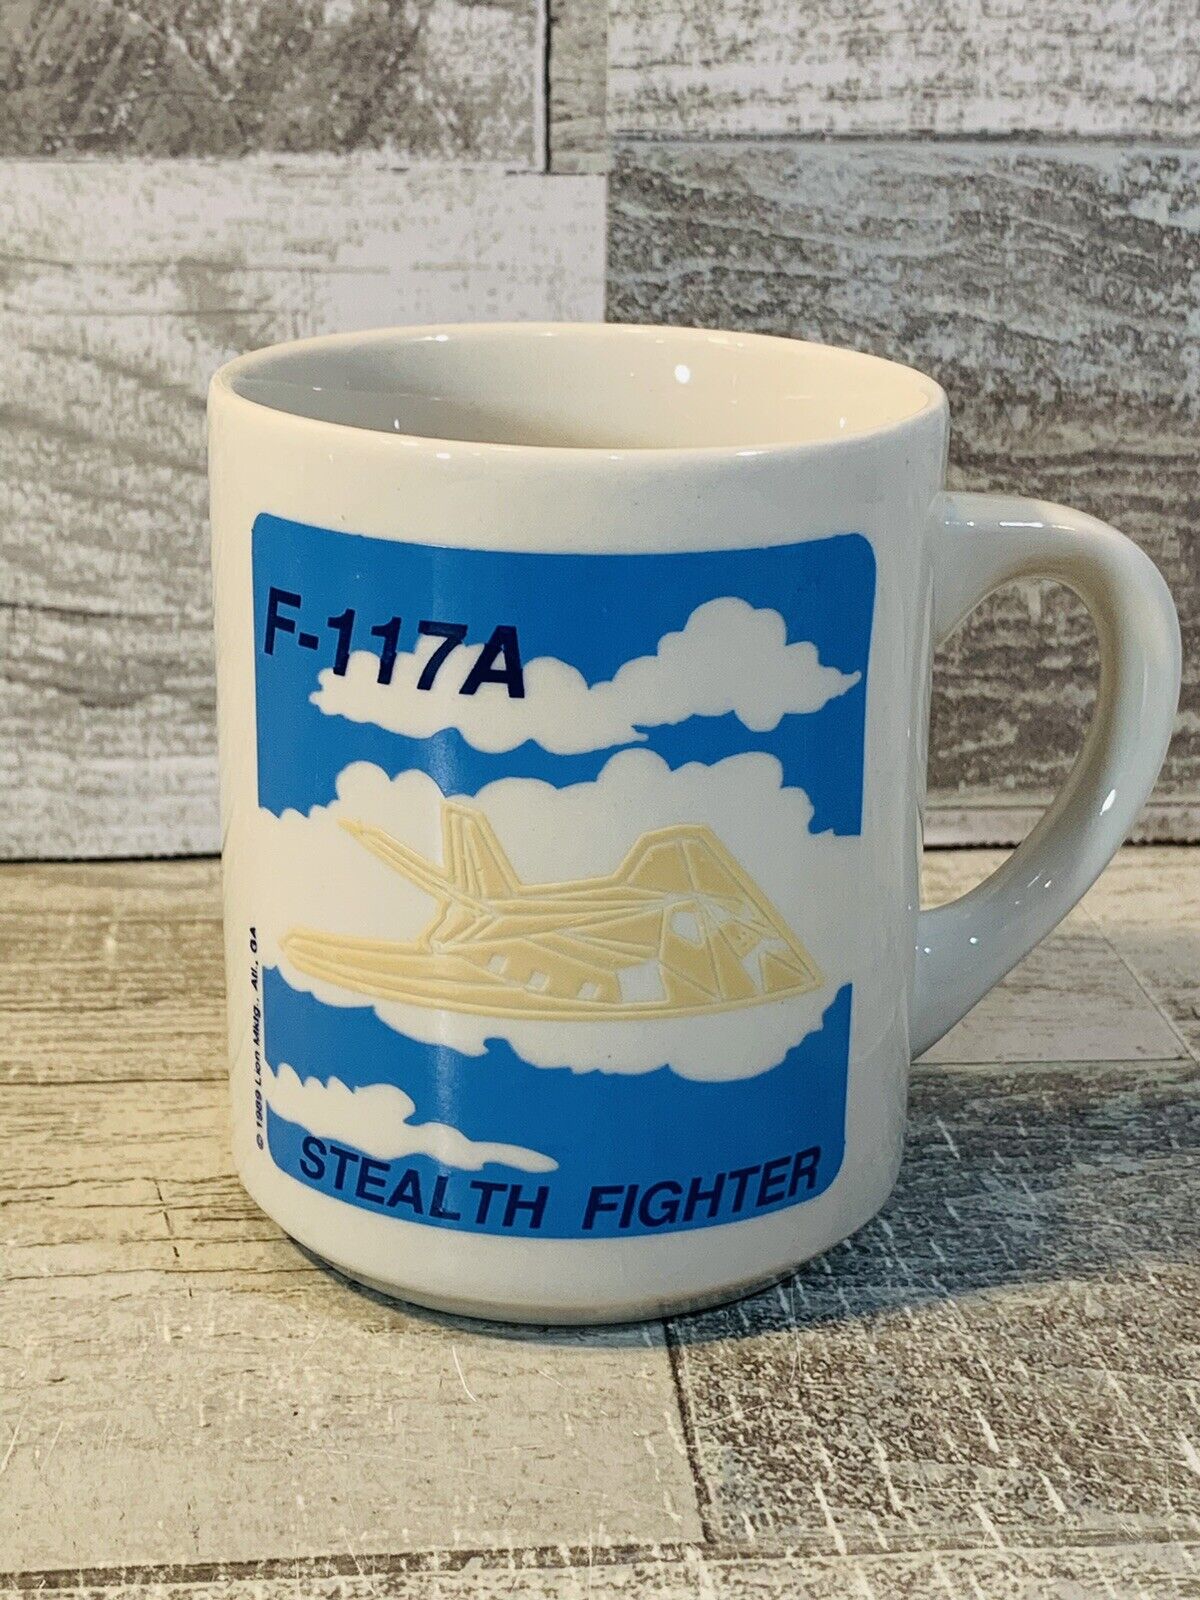 Vintage F-117A Stealth Fighter Coffee Mug Cup 1989 Lion Marketing Made USA